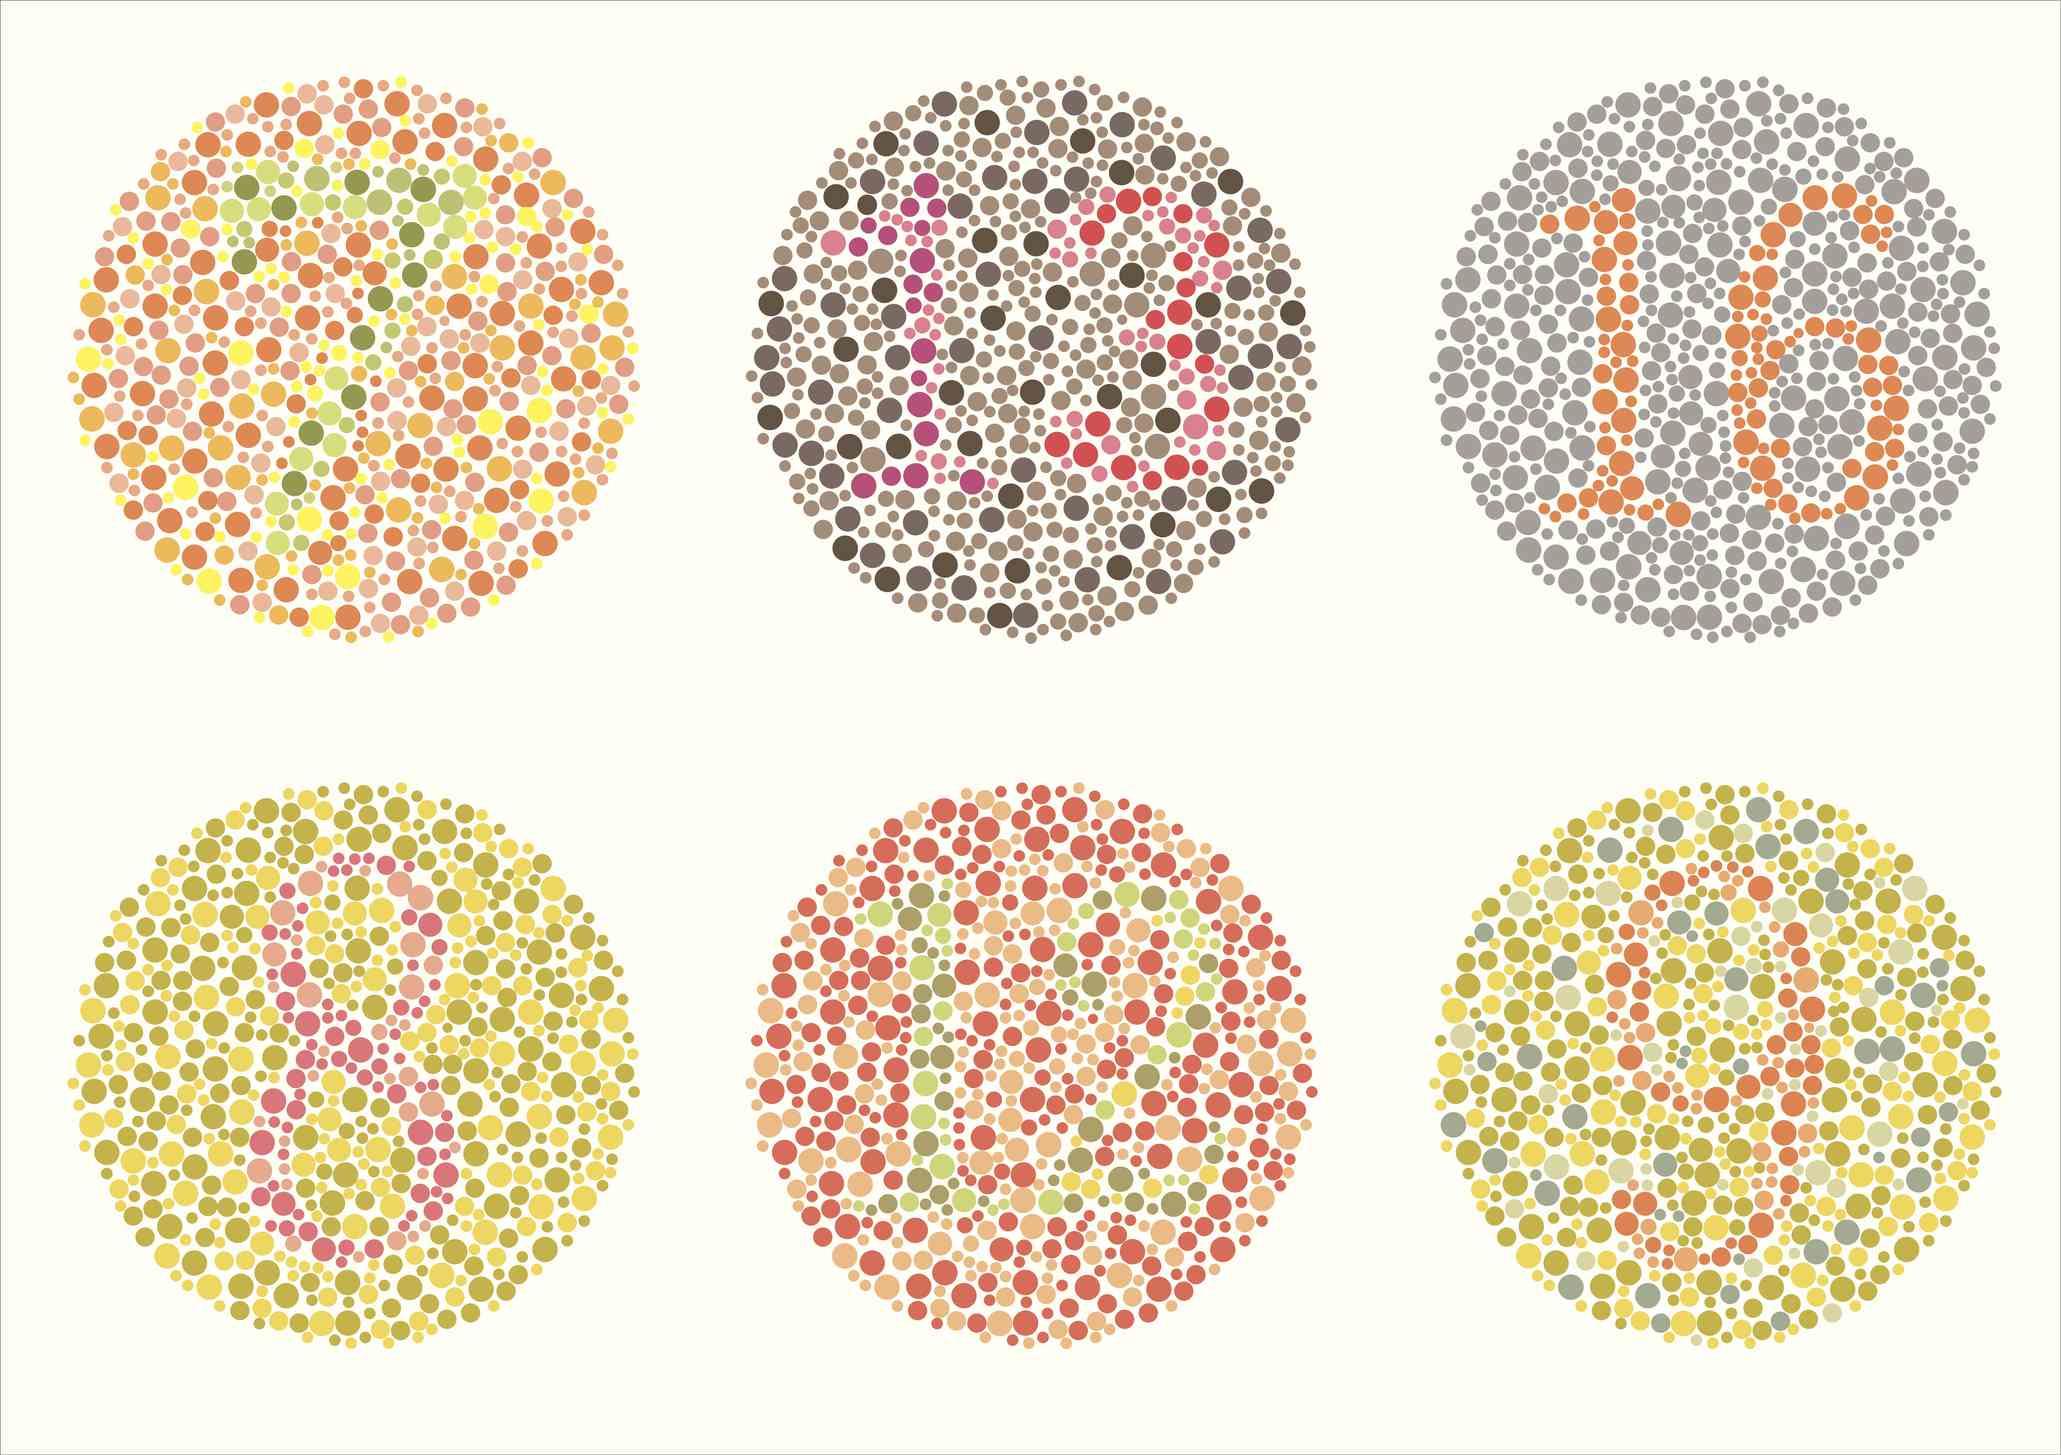 Example of colour blindness test, 6 circles are shown each circles is made up of coloured dots and within these circles are numbers in an alternate colour.